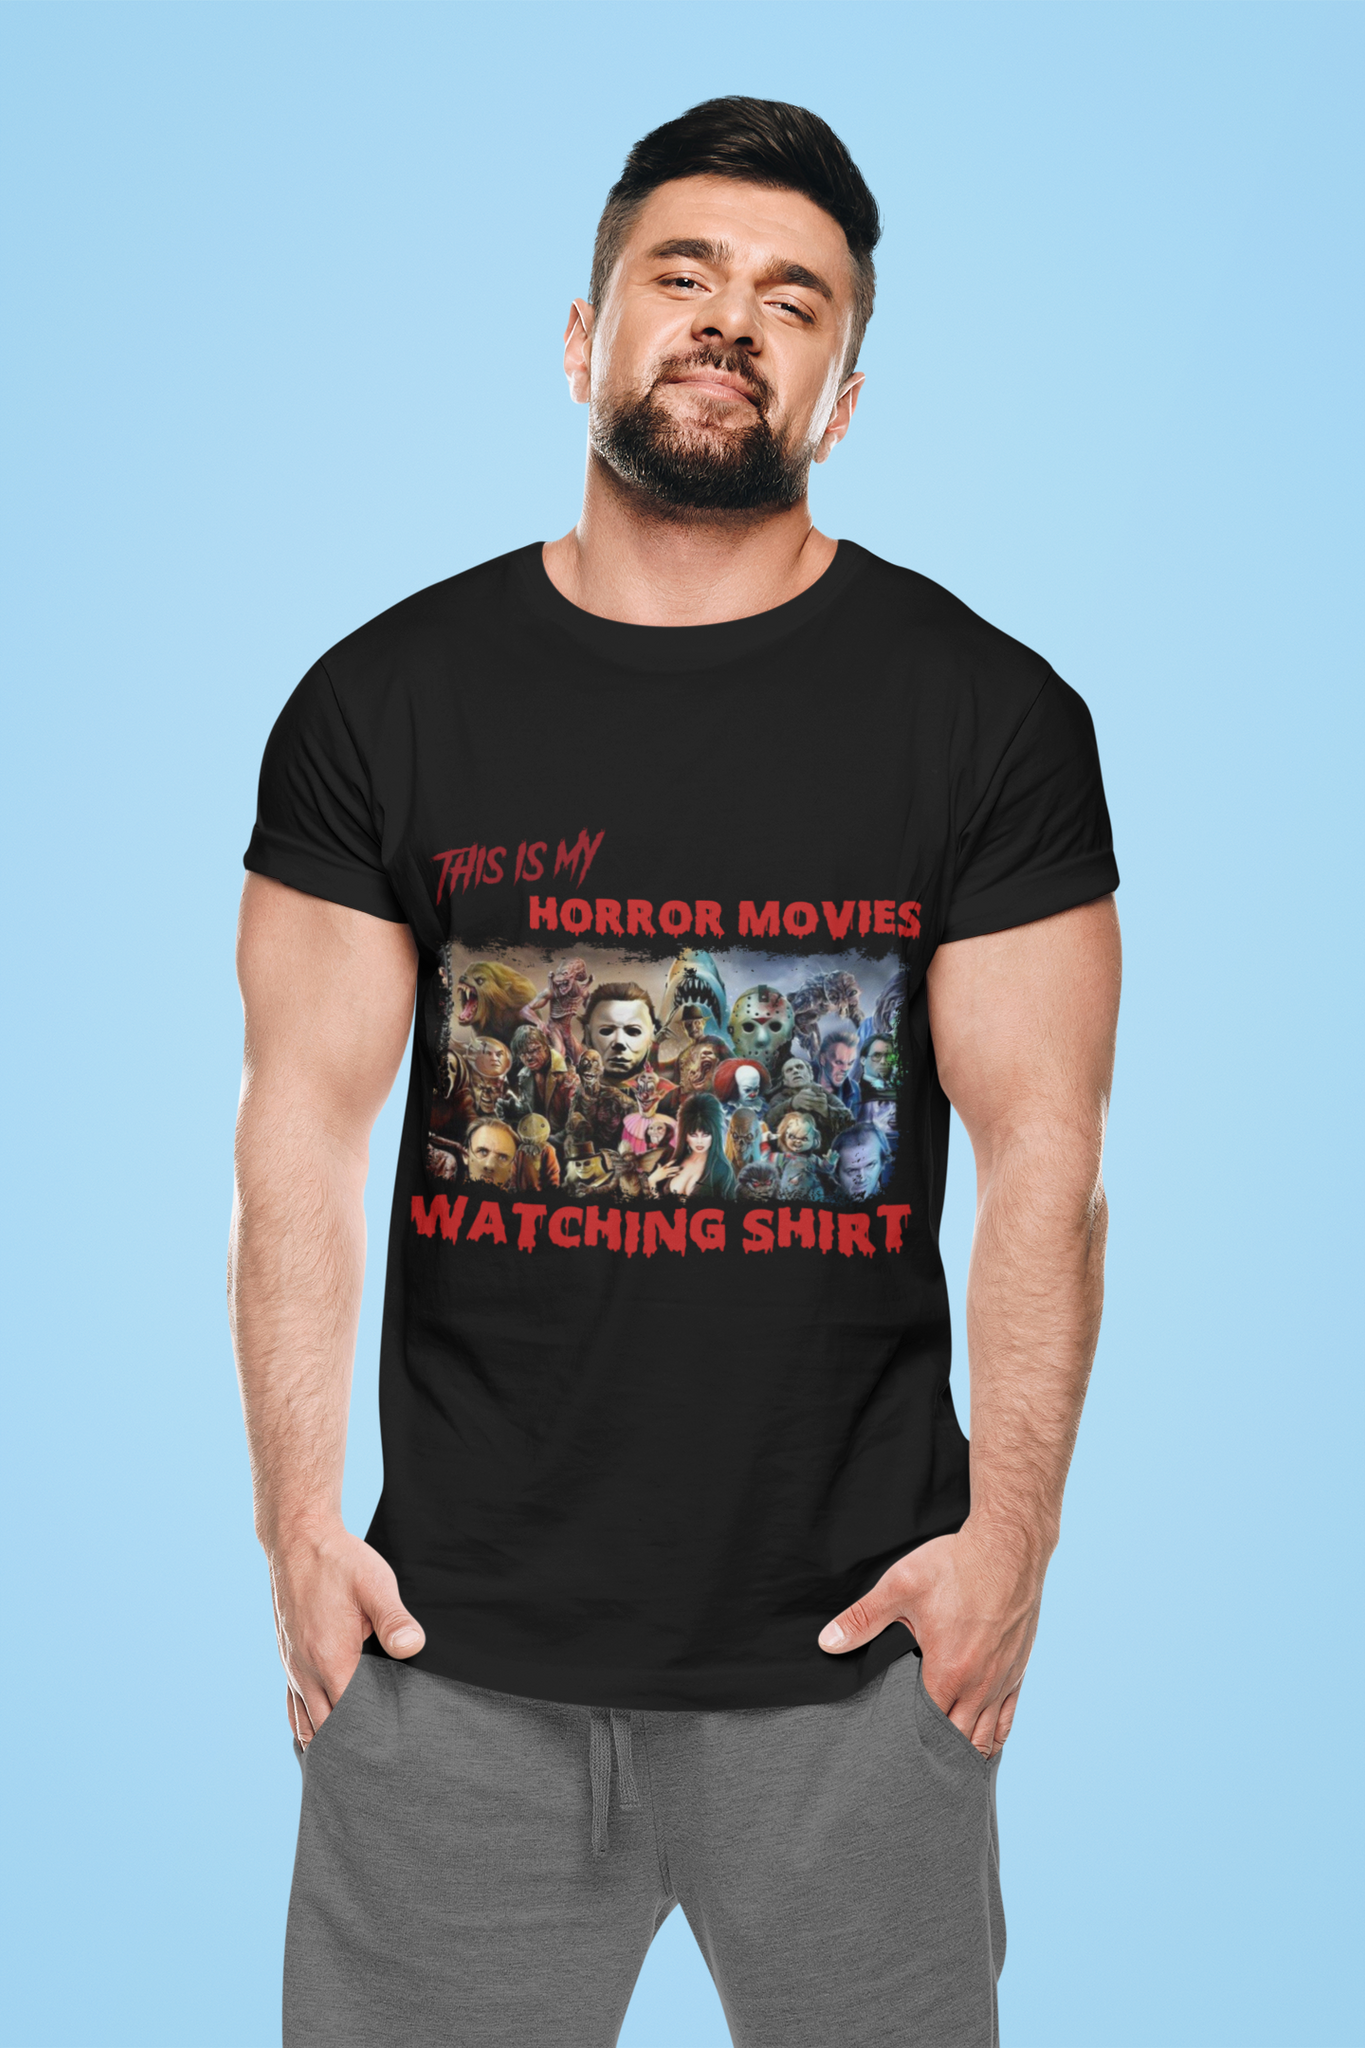 Horror Movie Characters T Shirt, This Is My Horror Movies Watching Shirt, Chucky Pennywise Voorhees T Shirt, Halloween Gifts